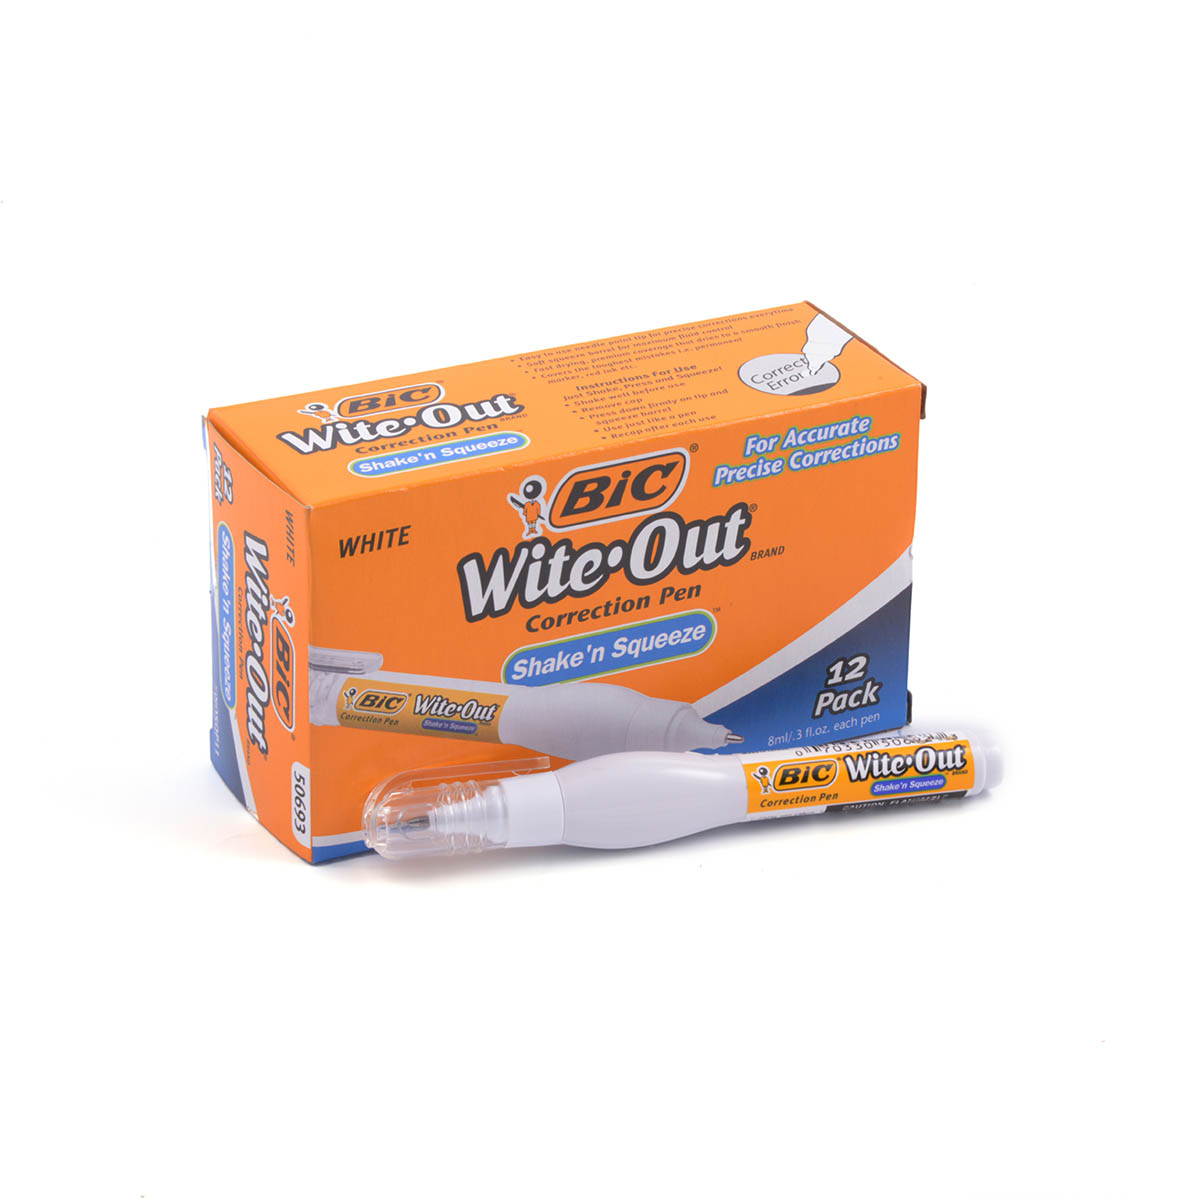 BIC Wite-Out Correction Pen Shake 'n Squeeze - New